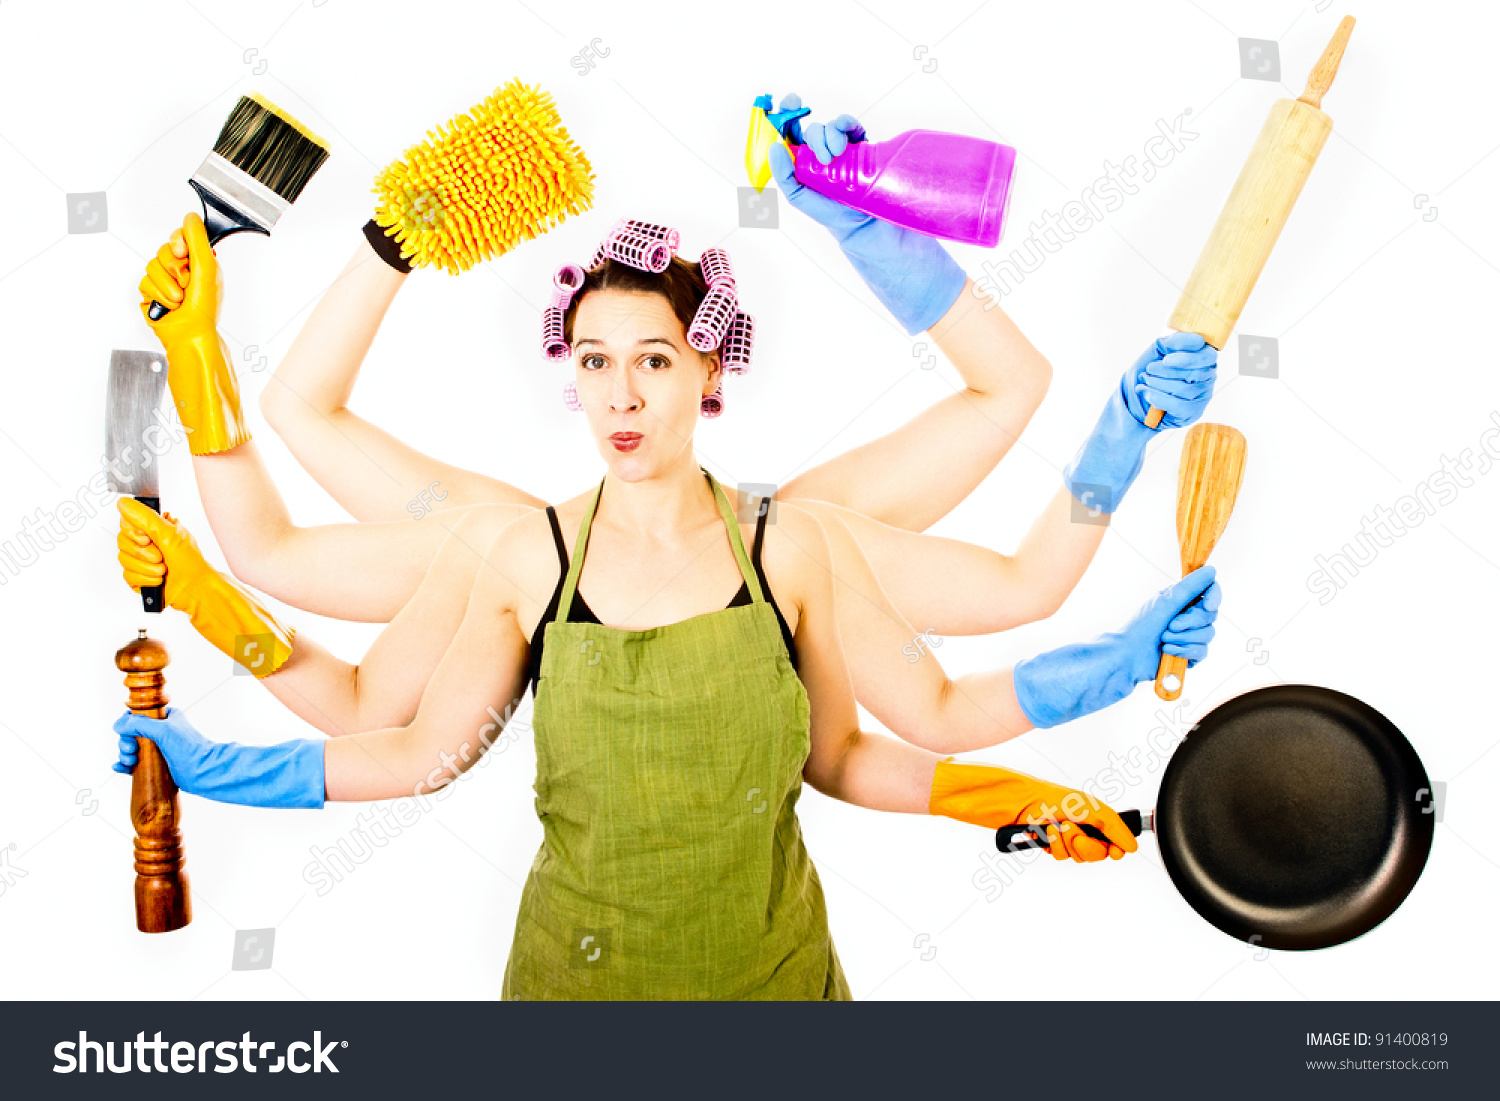 Happy Very Busy Multitasking Housewife Stock Photo 91400819 - Shutterstock